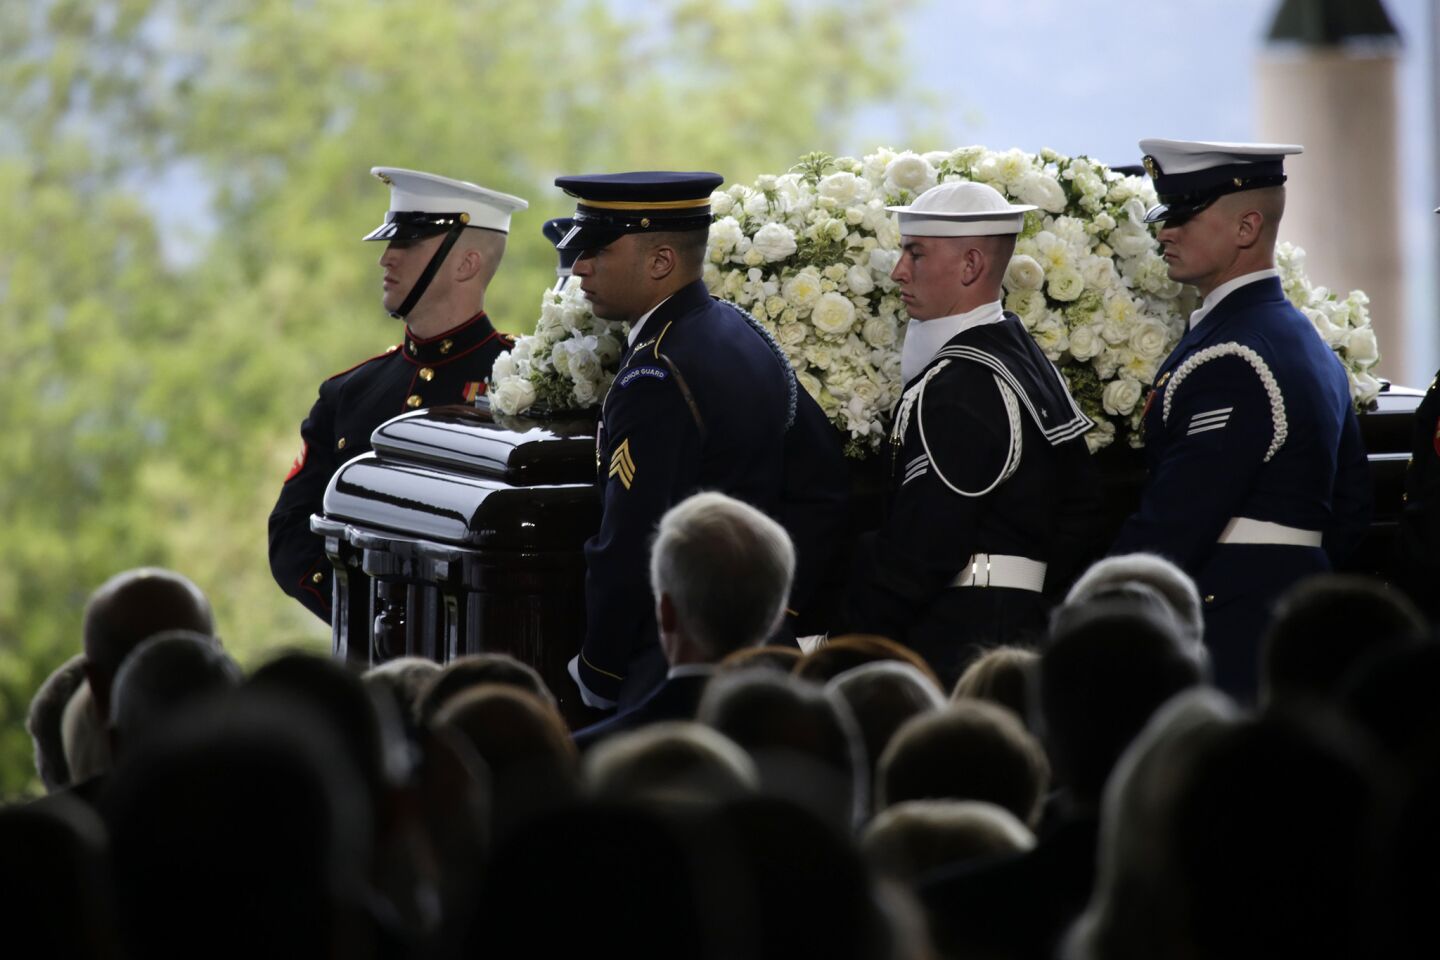 A military honor guard carries Nancy Reagan's casket to her gravesite at the Ronald Reagan Presidential Library in Simi Valley.